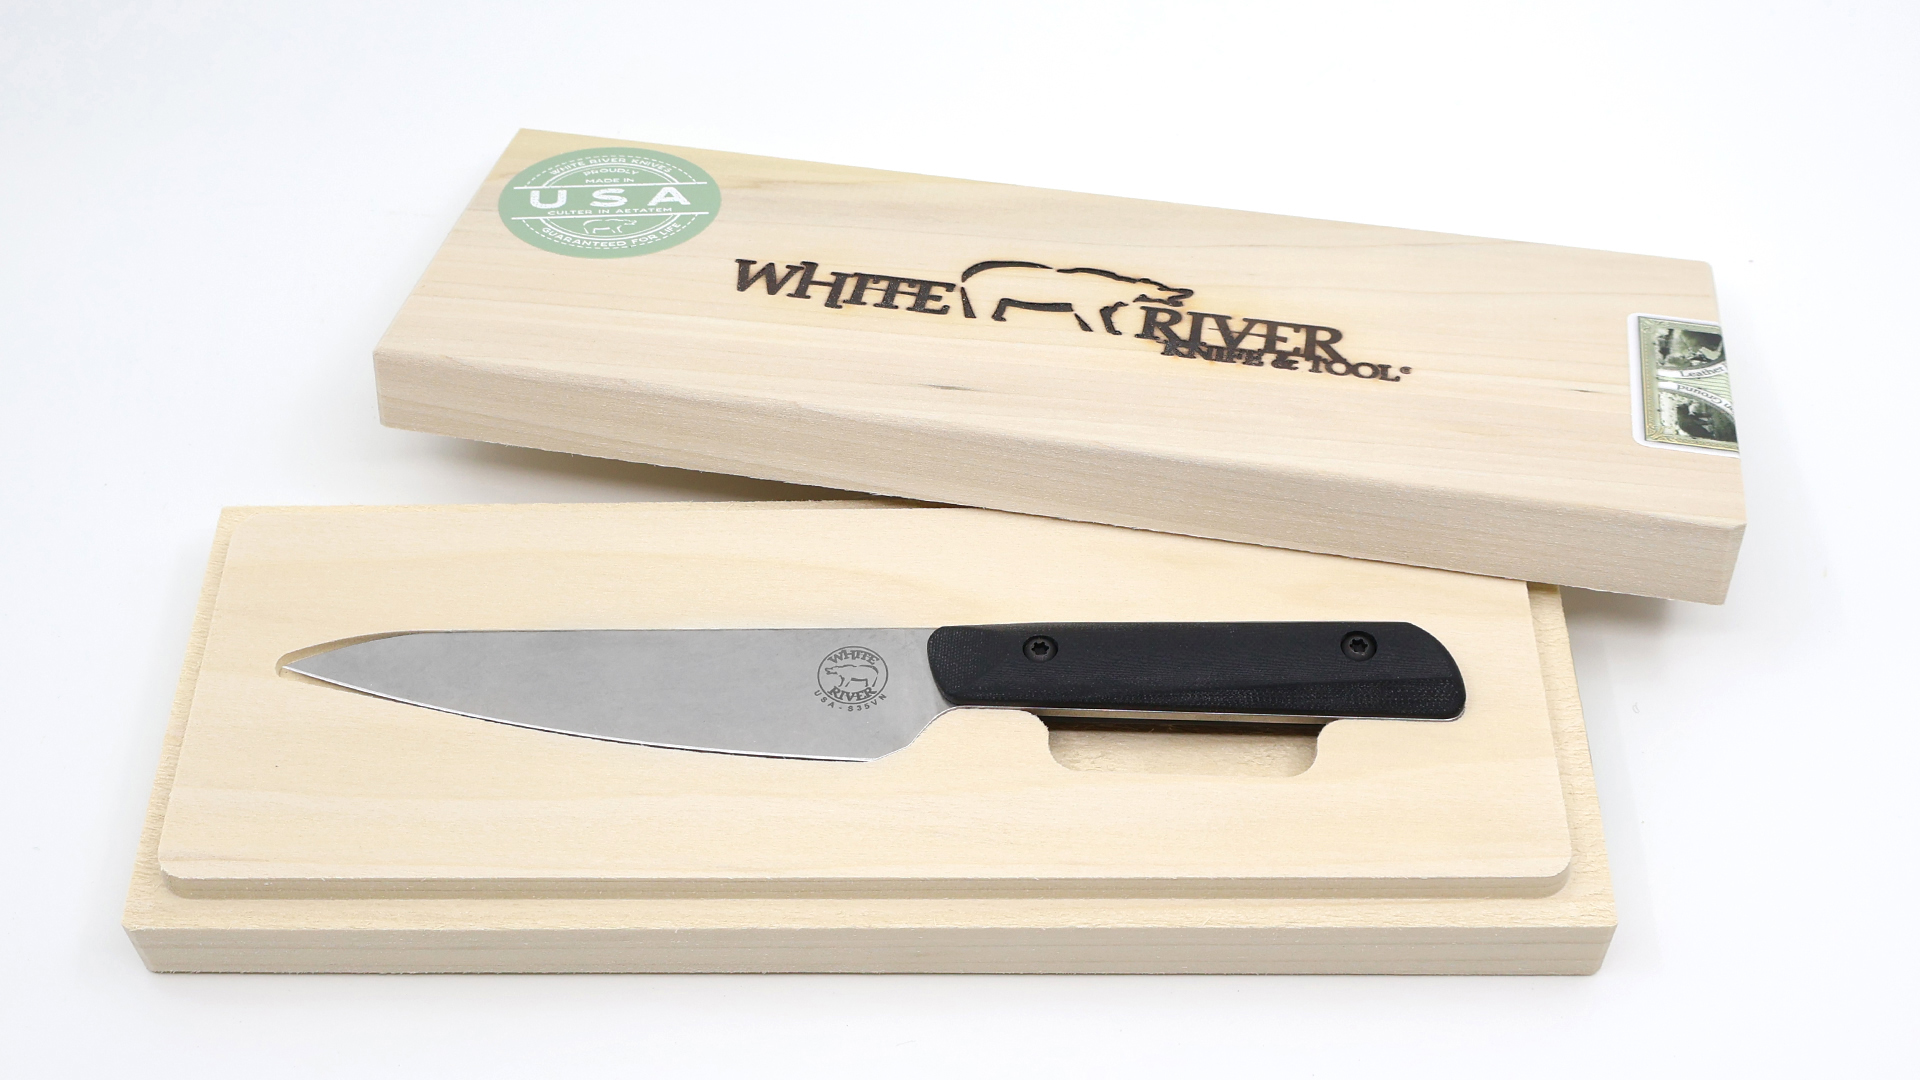 Custom Engraved Chef Knife | Personalize Your Chef Knife | Lifetime Warranty | Made in